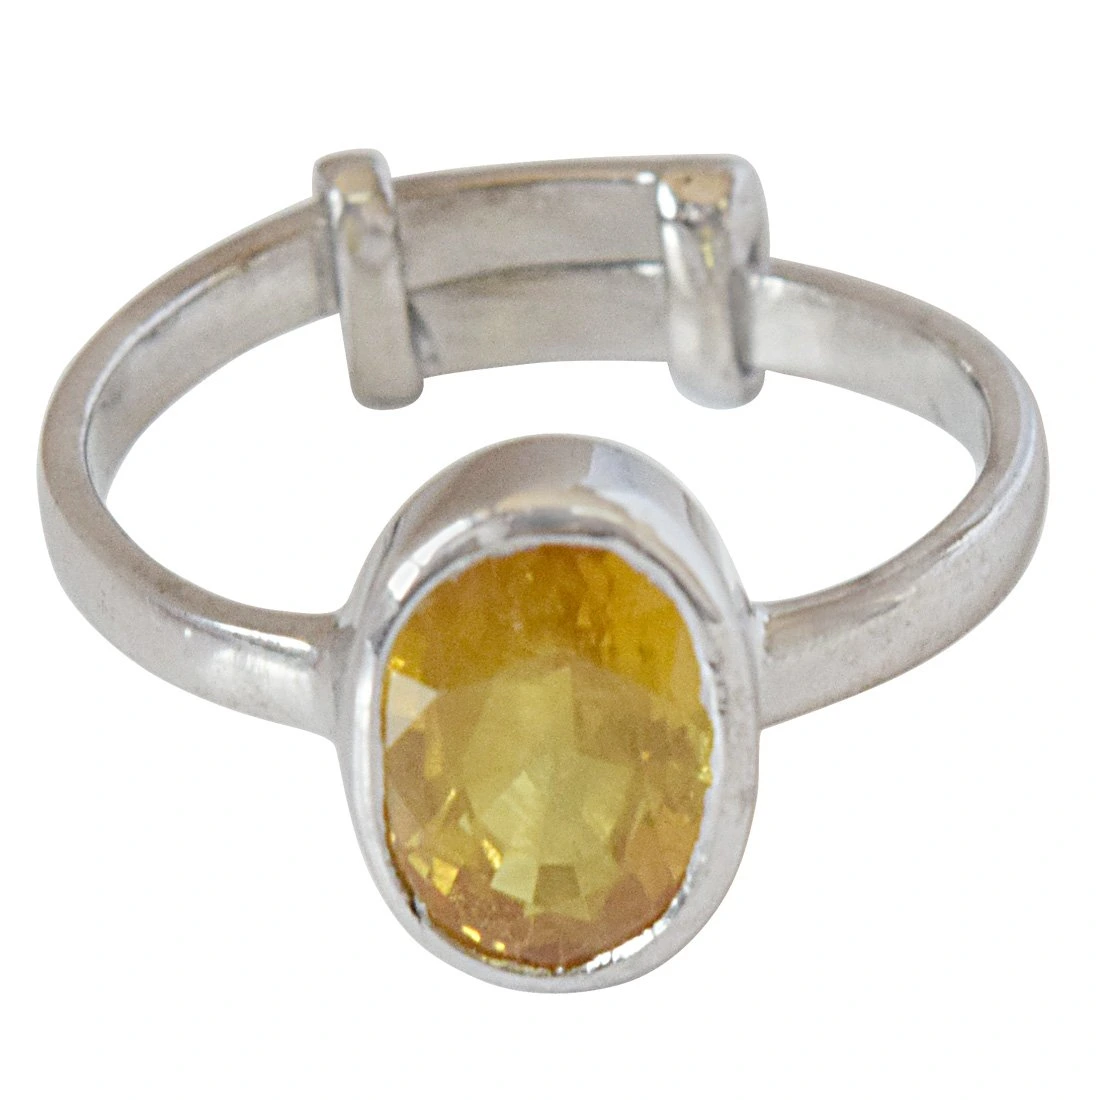 2.72cts Oval Yellow Pokhraj and 925 Silver Adjustable Ring for Women (GSR64)